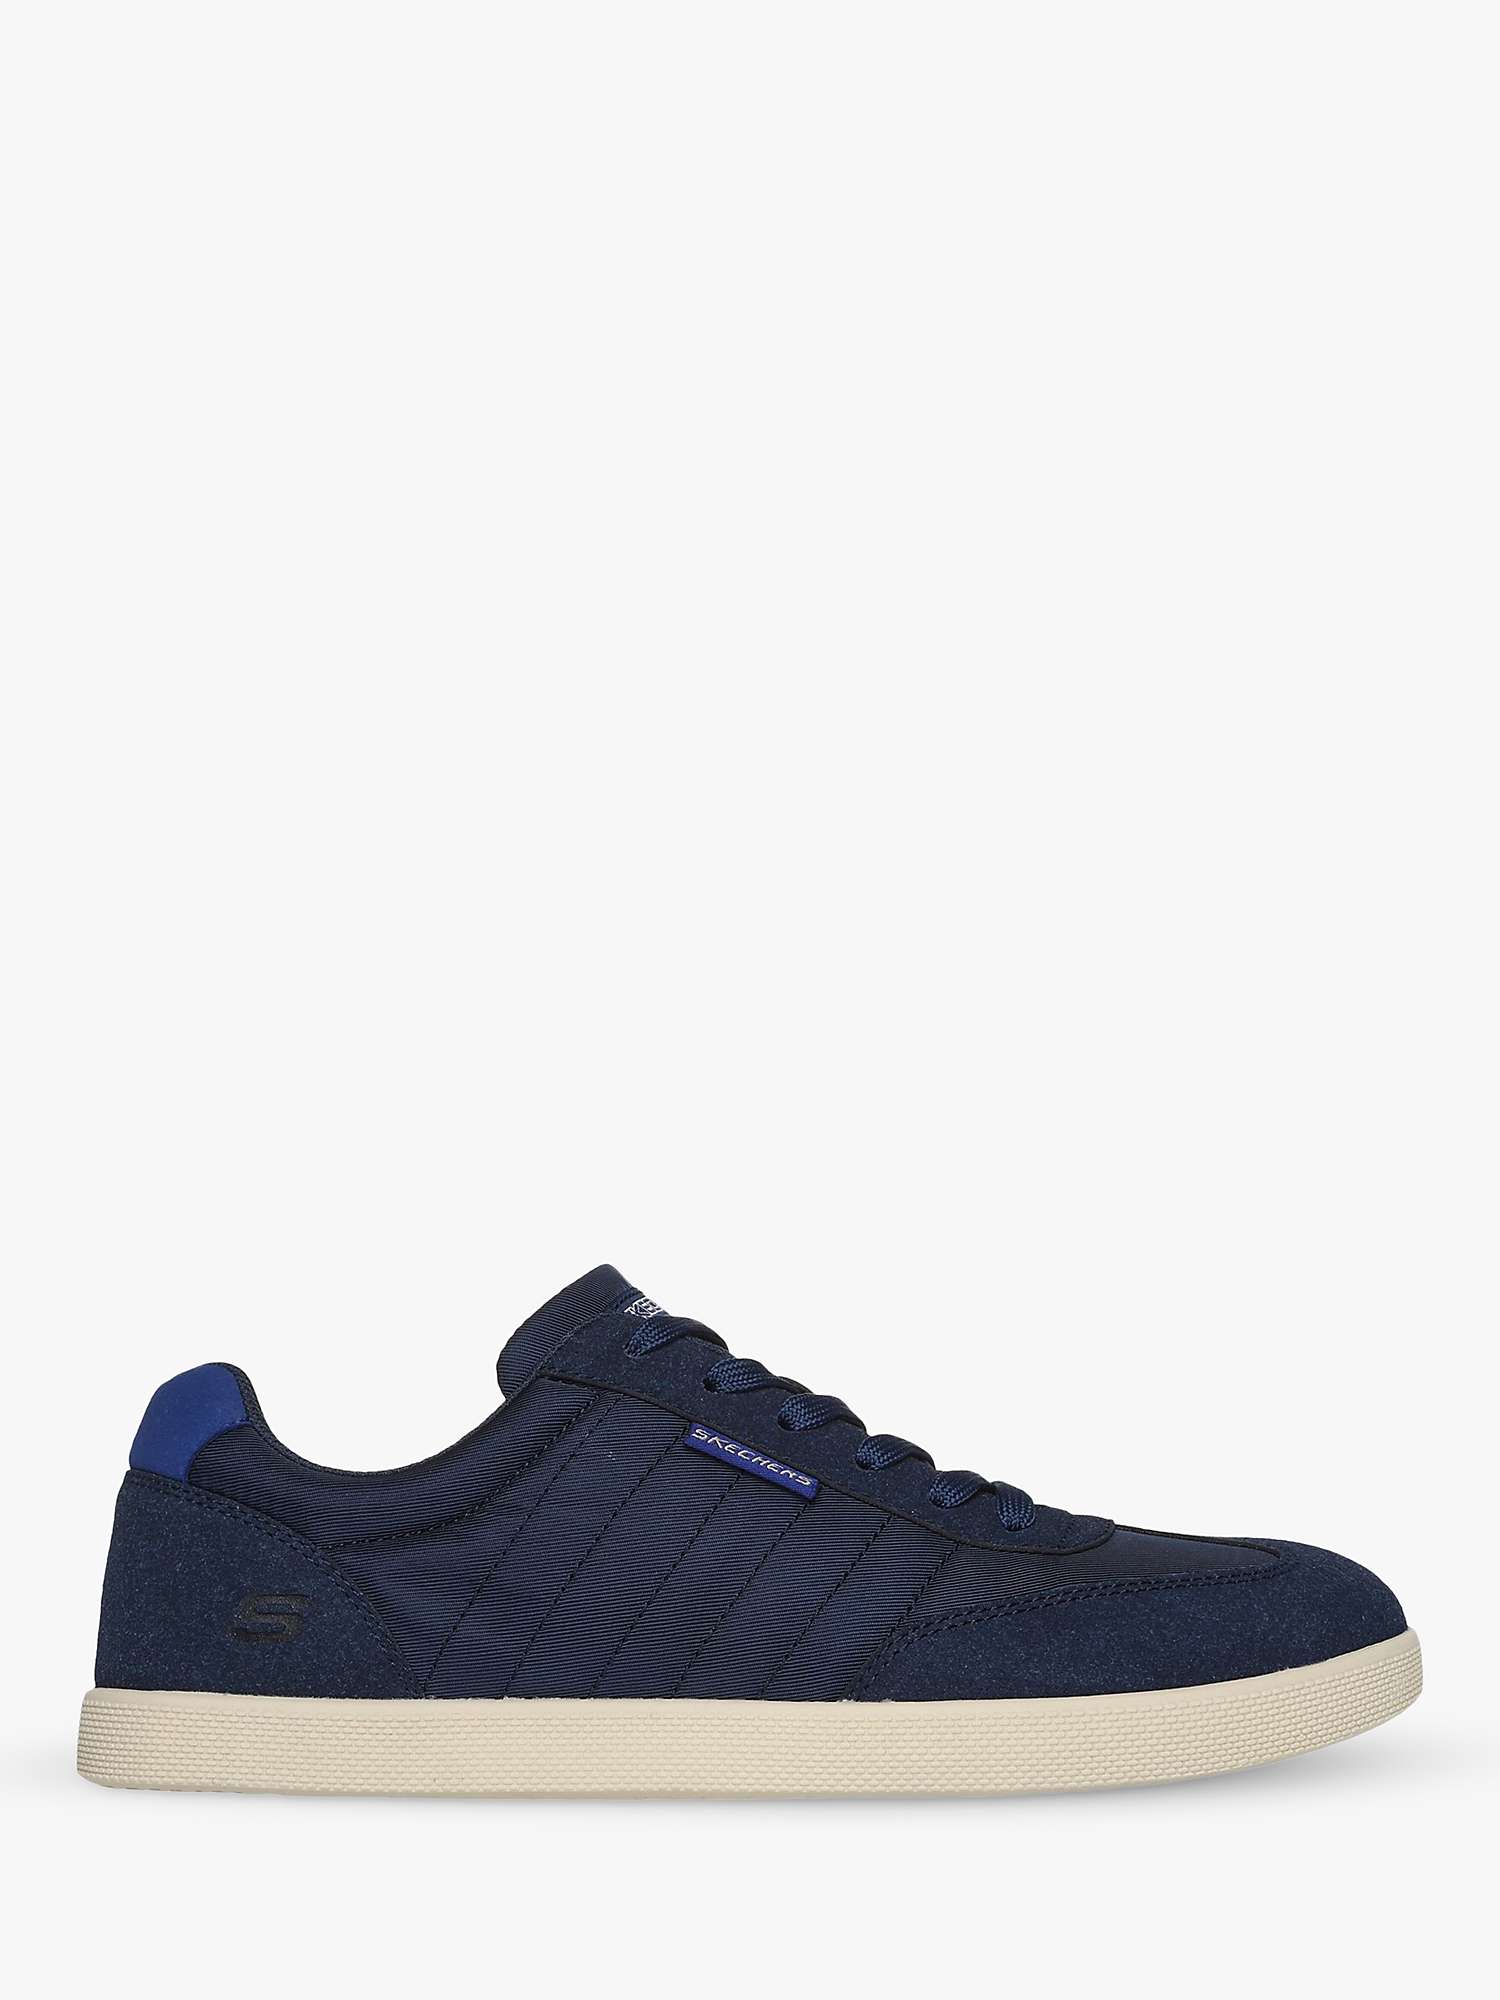 Buy Skechers Placer Vinson Lace-Up Trainers, Navy Online at johnlewis.com